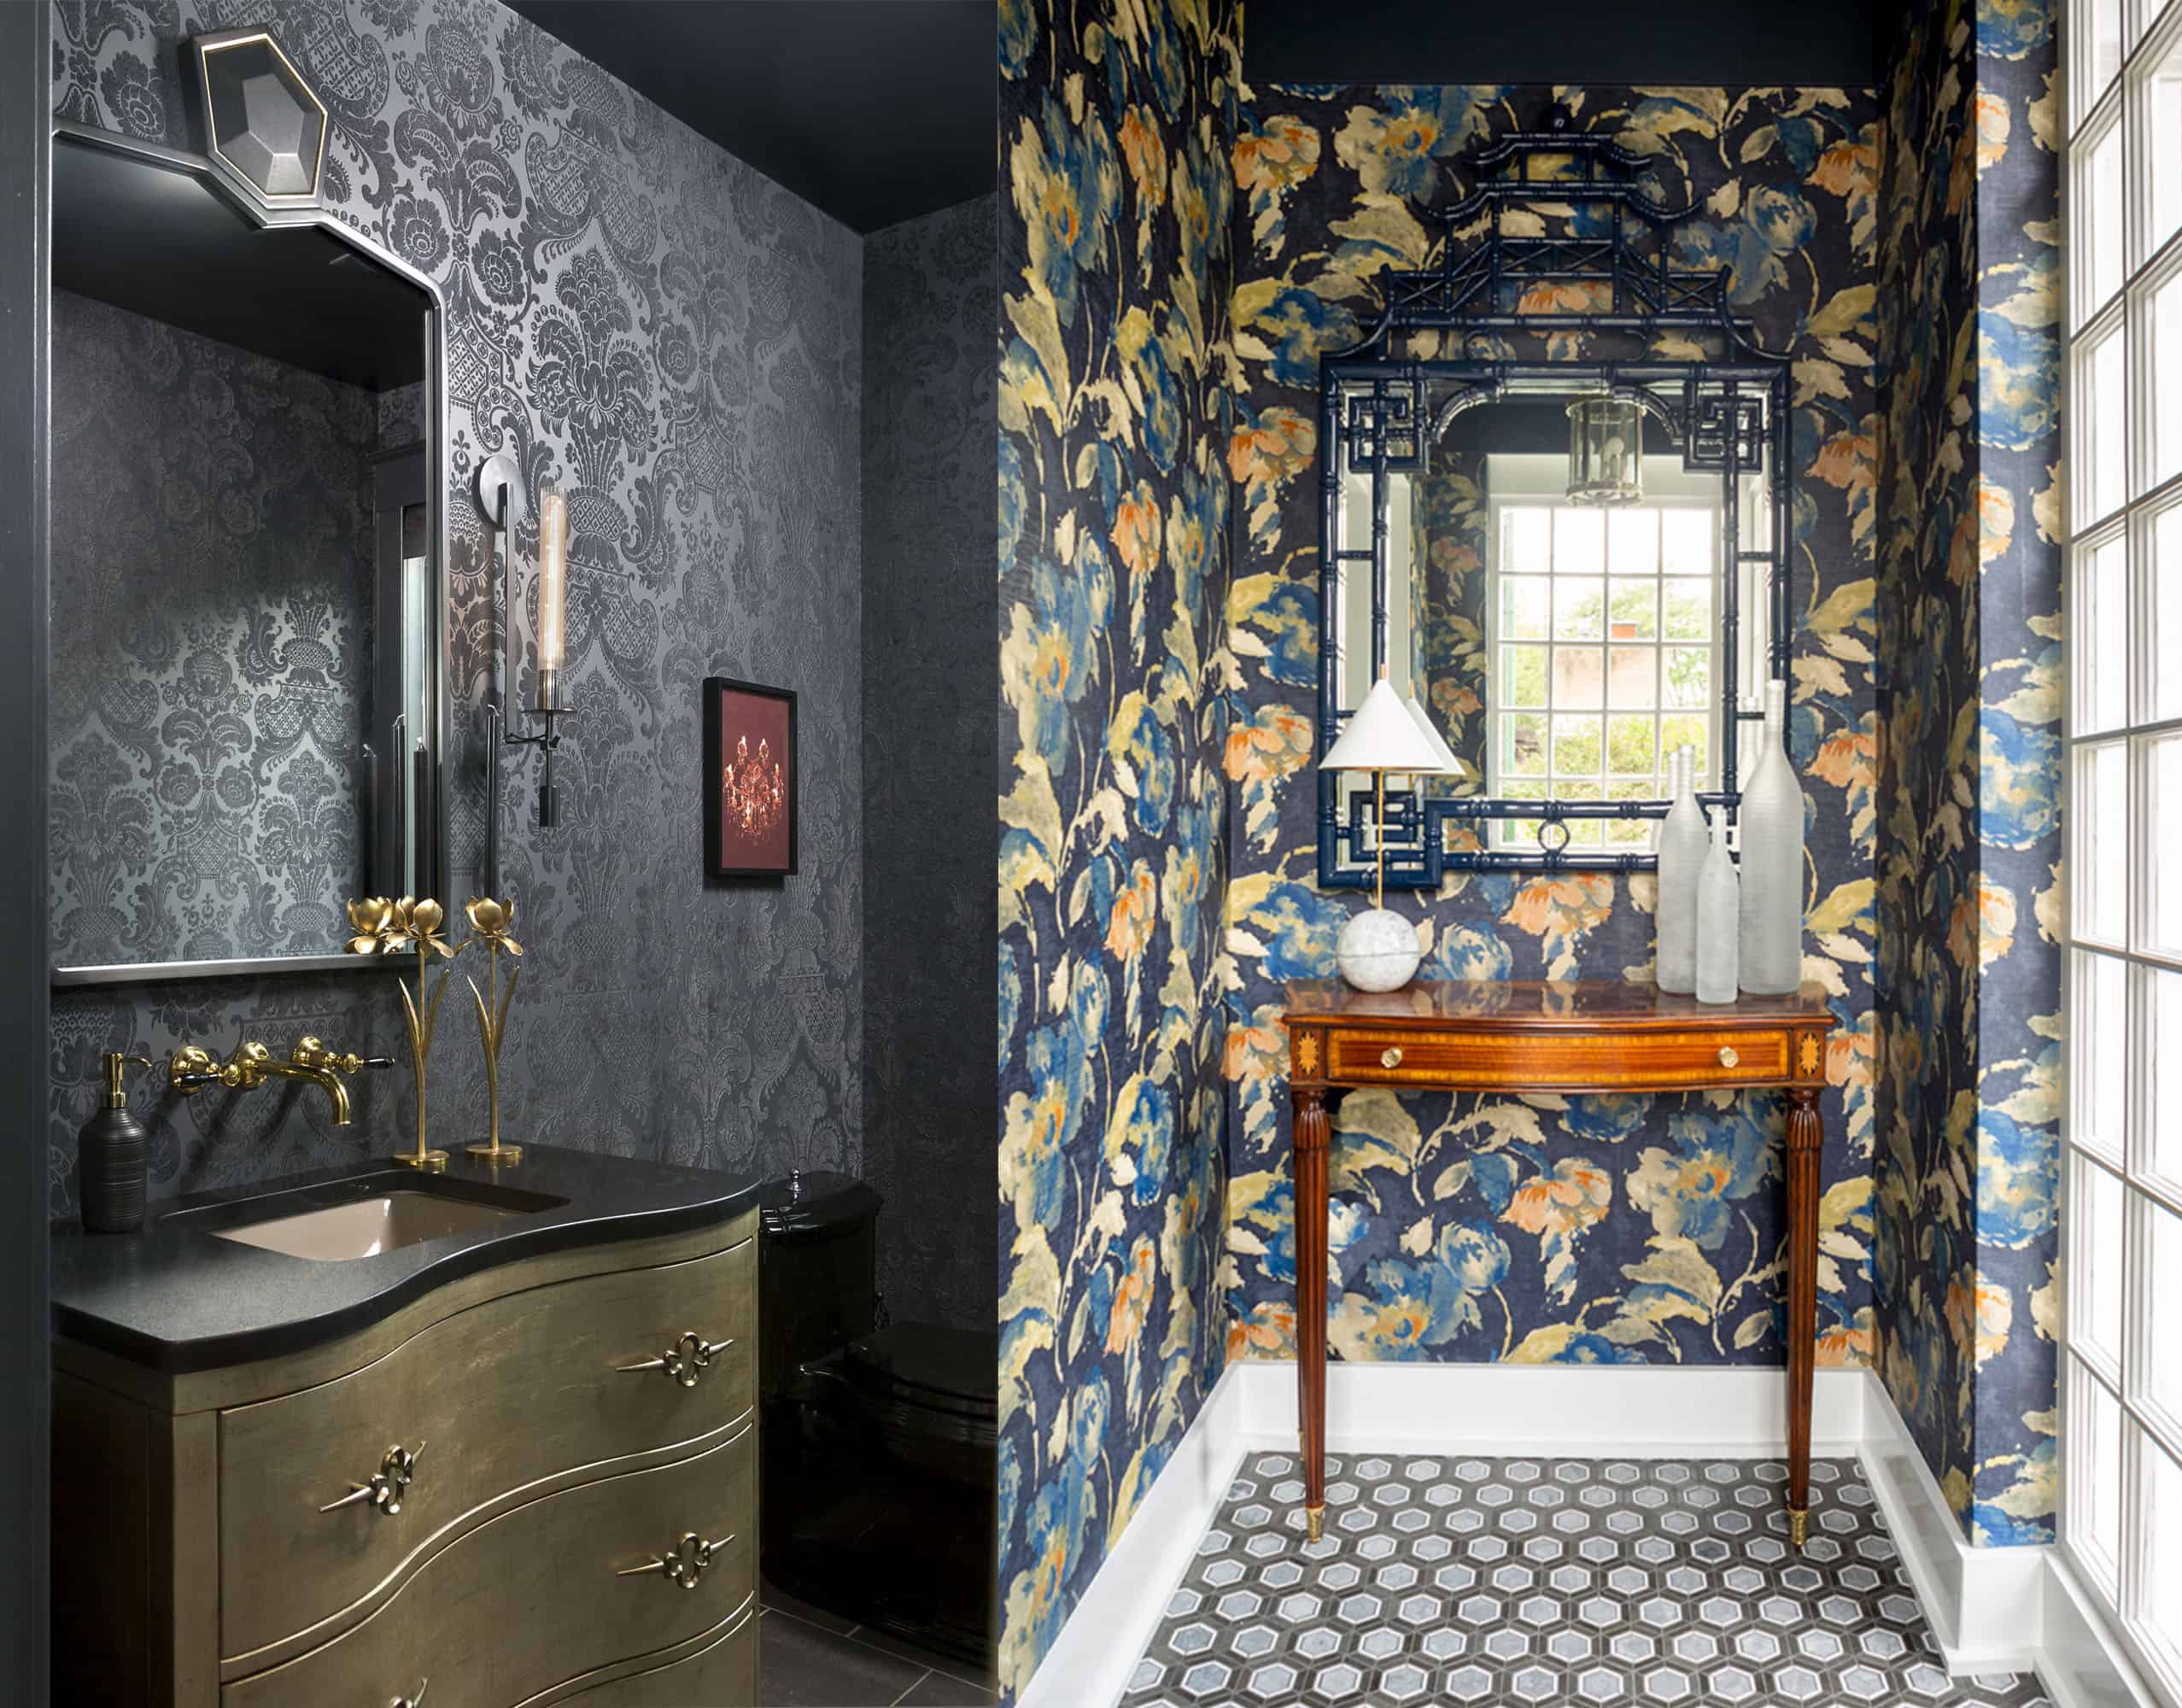 FAIRFAX Project Black Powder Room and GLENCOE Entry_Duet Design Group_Dark and Moody Spaces